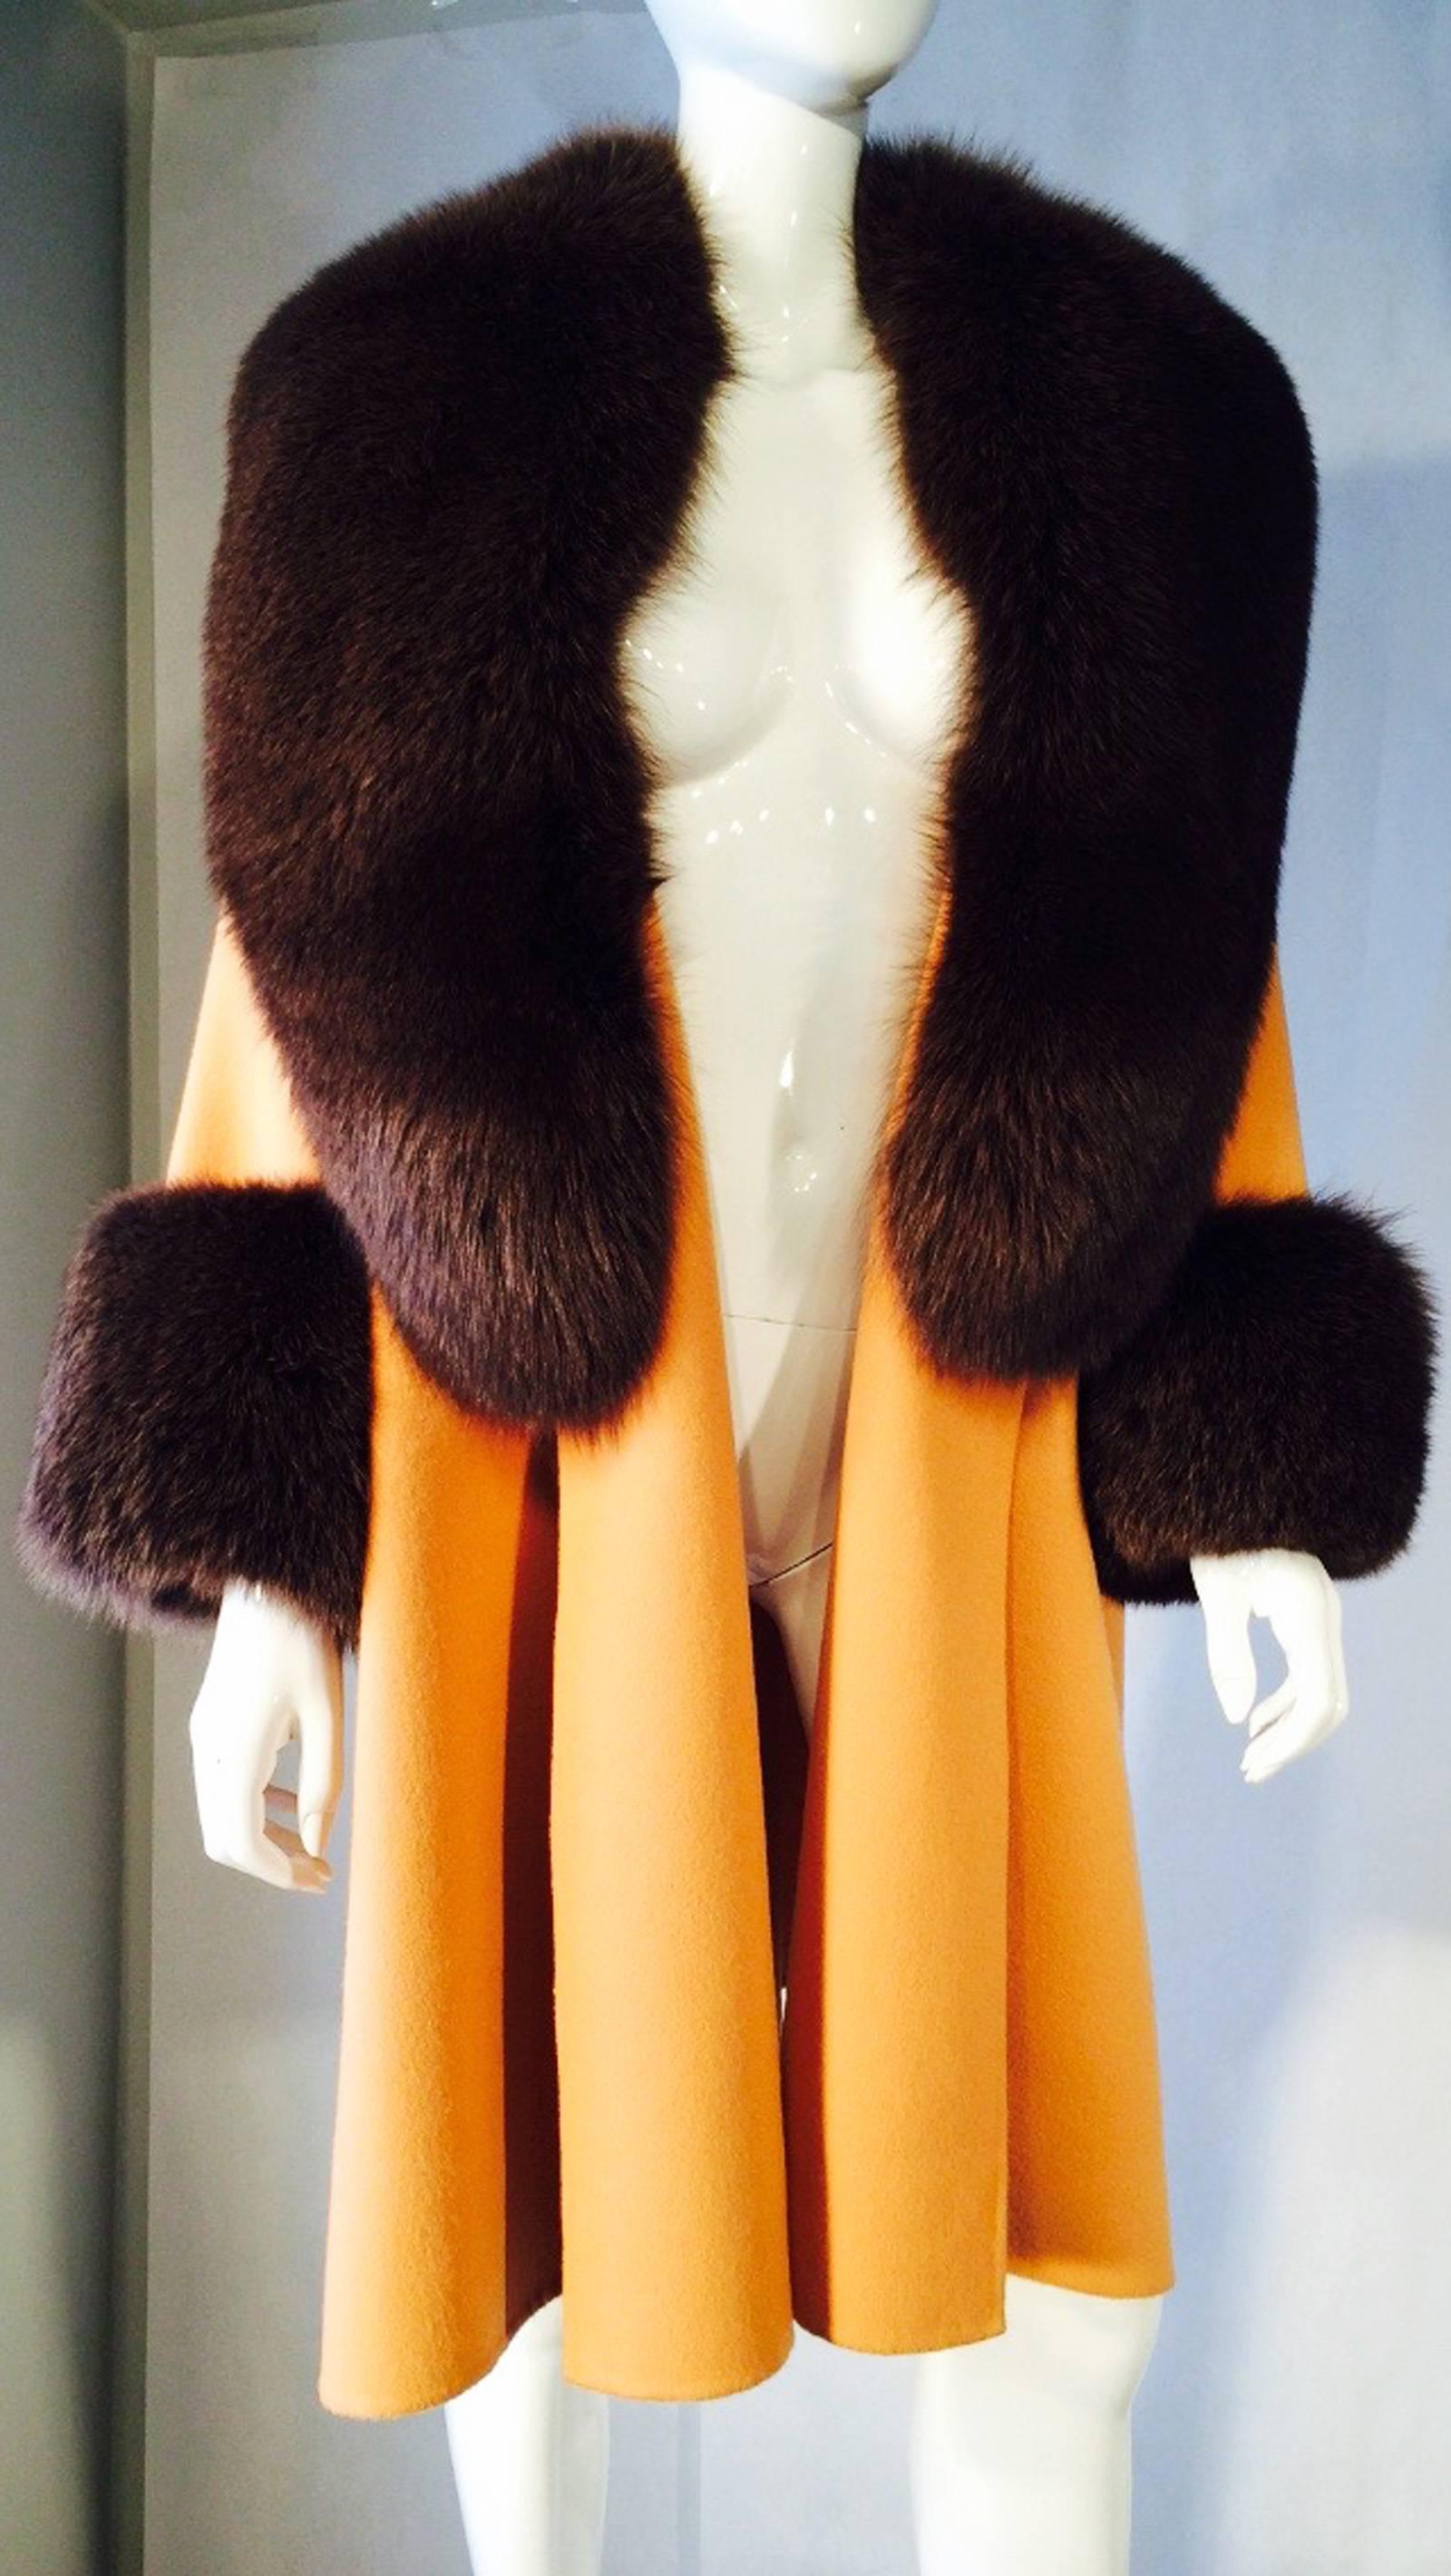 A exquisite vintage John Anthony couture fur trimmed swing coat. Double faced melon wool coat with thick luscious green over brown dyed fox fur collar and cuffs. Item fully lined with a open front (no closures). A fantastic one-off American